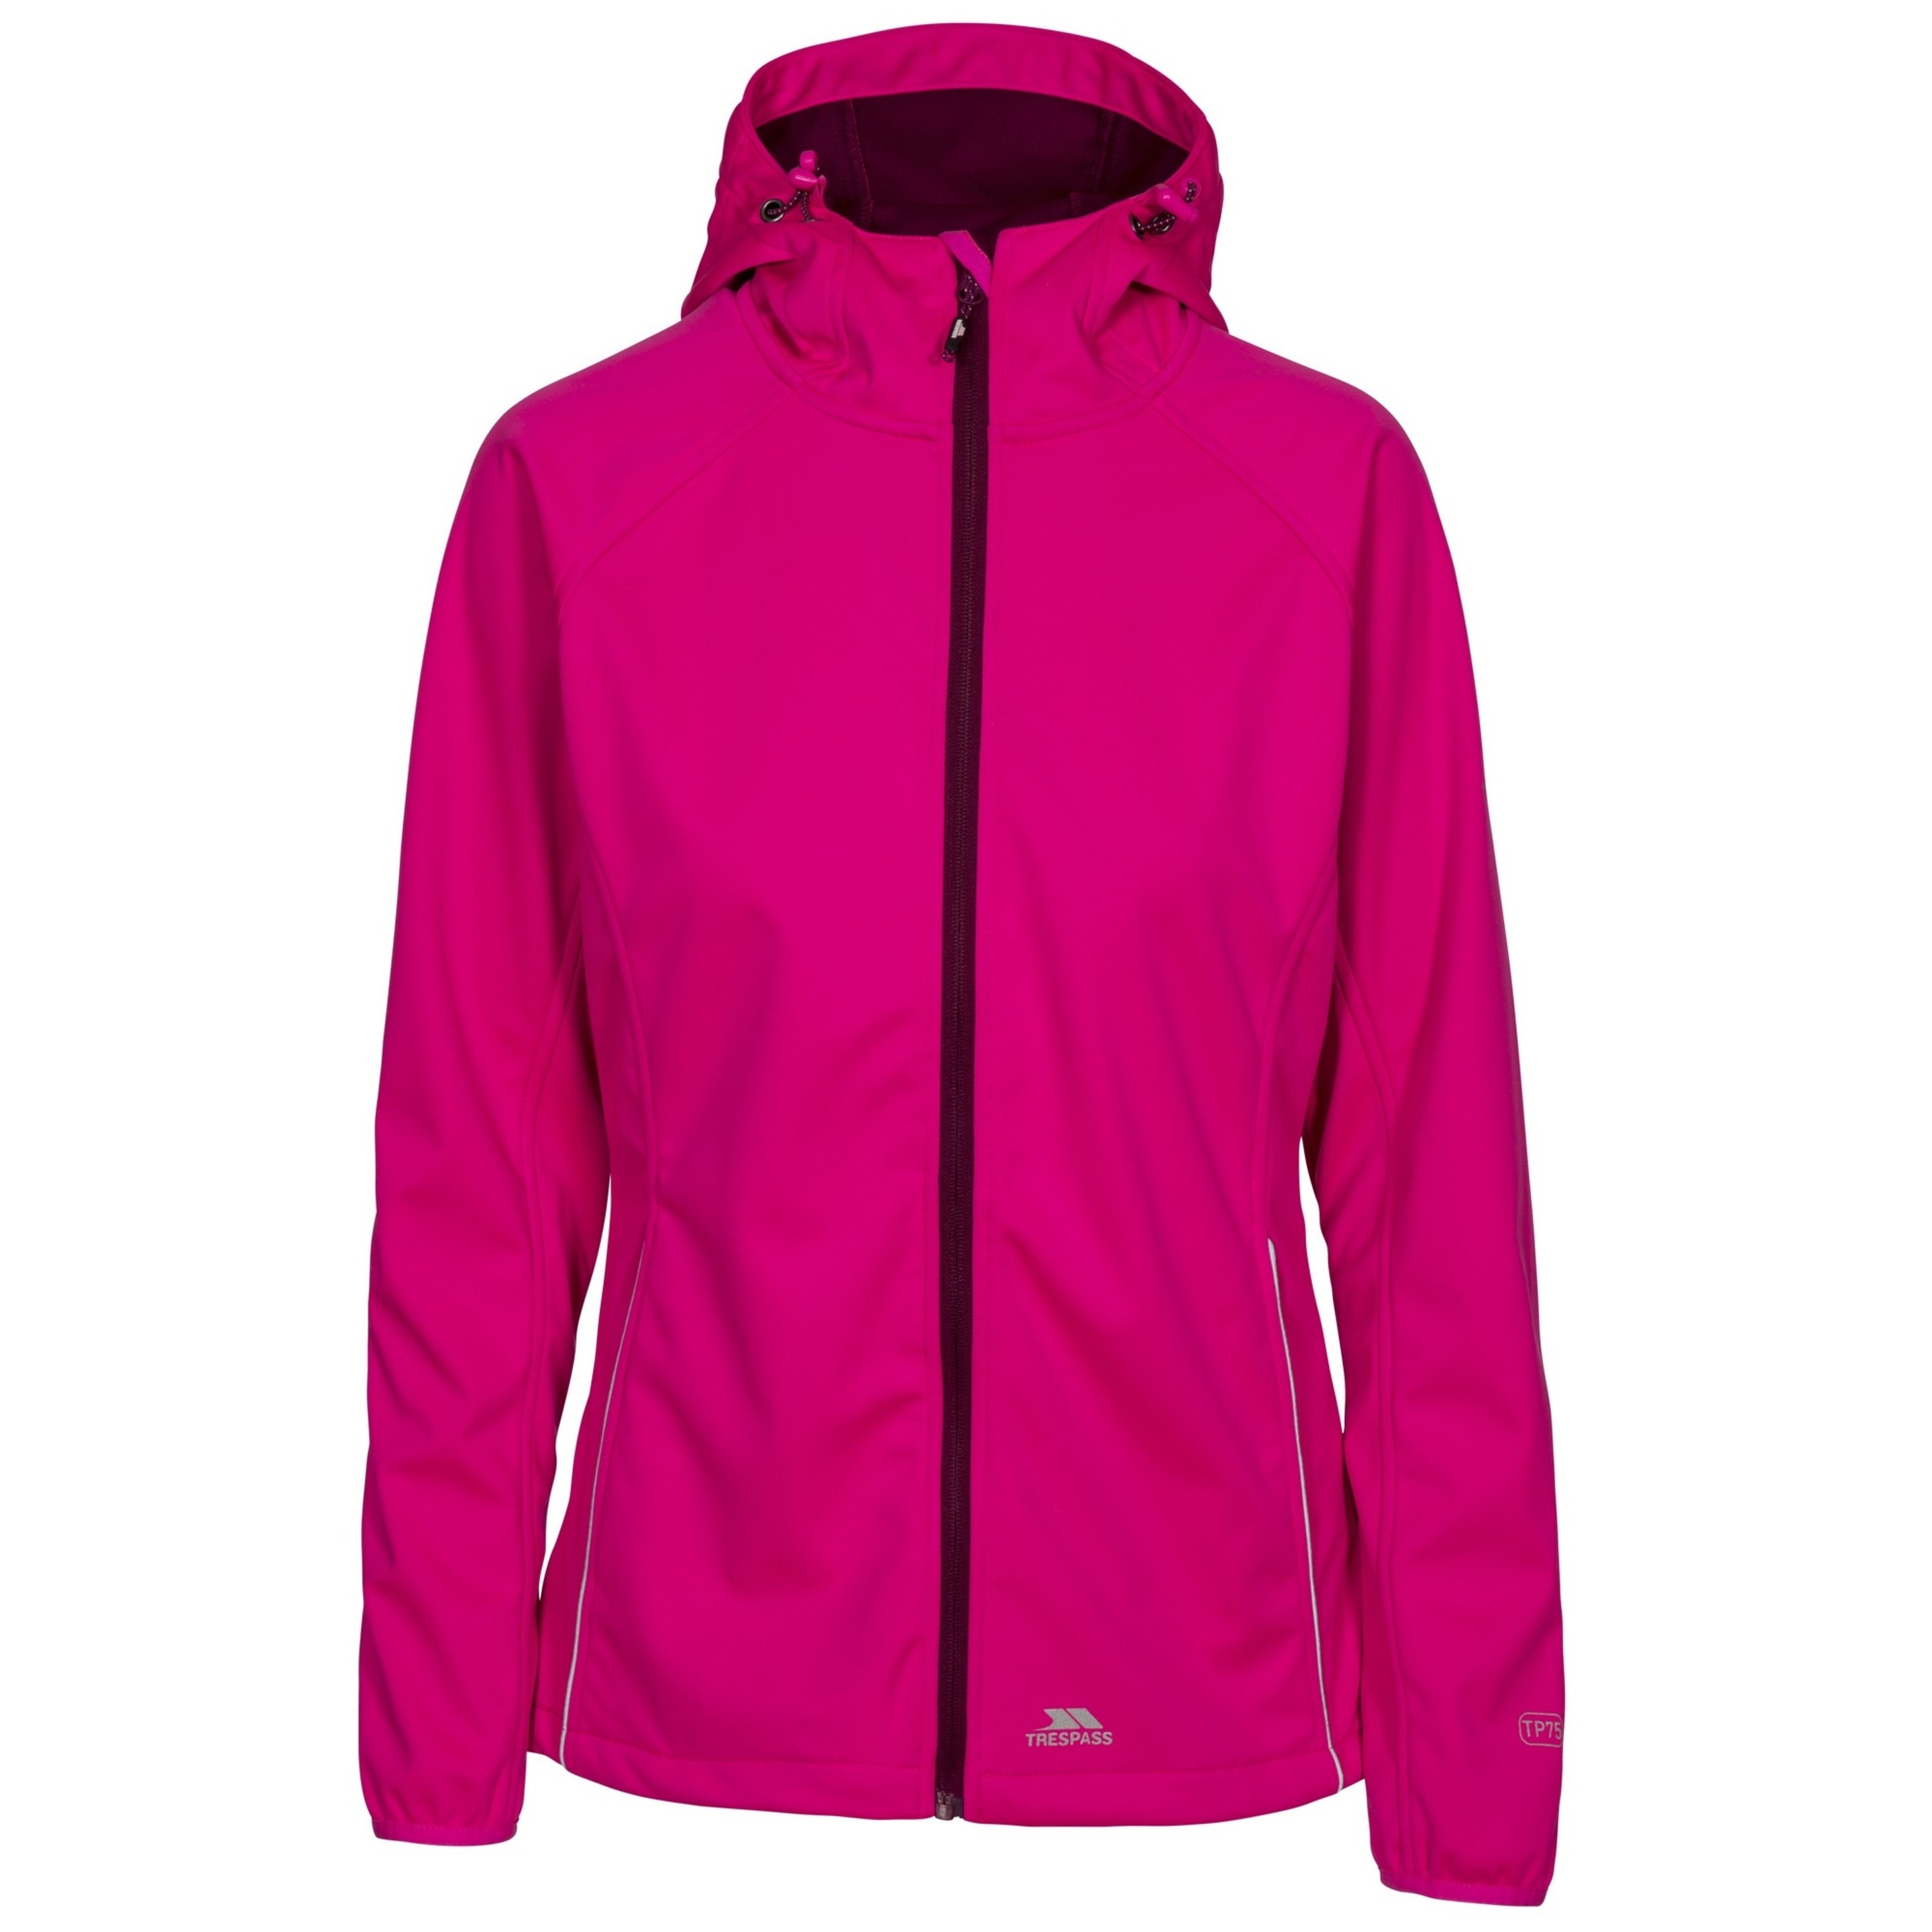 Chaqueta Softshell Impermeable Modelo Sisely Para Mujer Trespass (Gris)